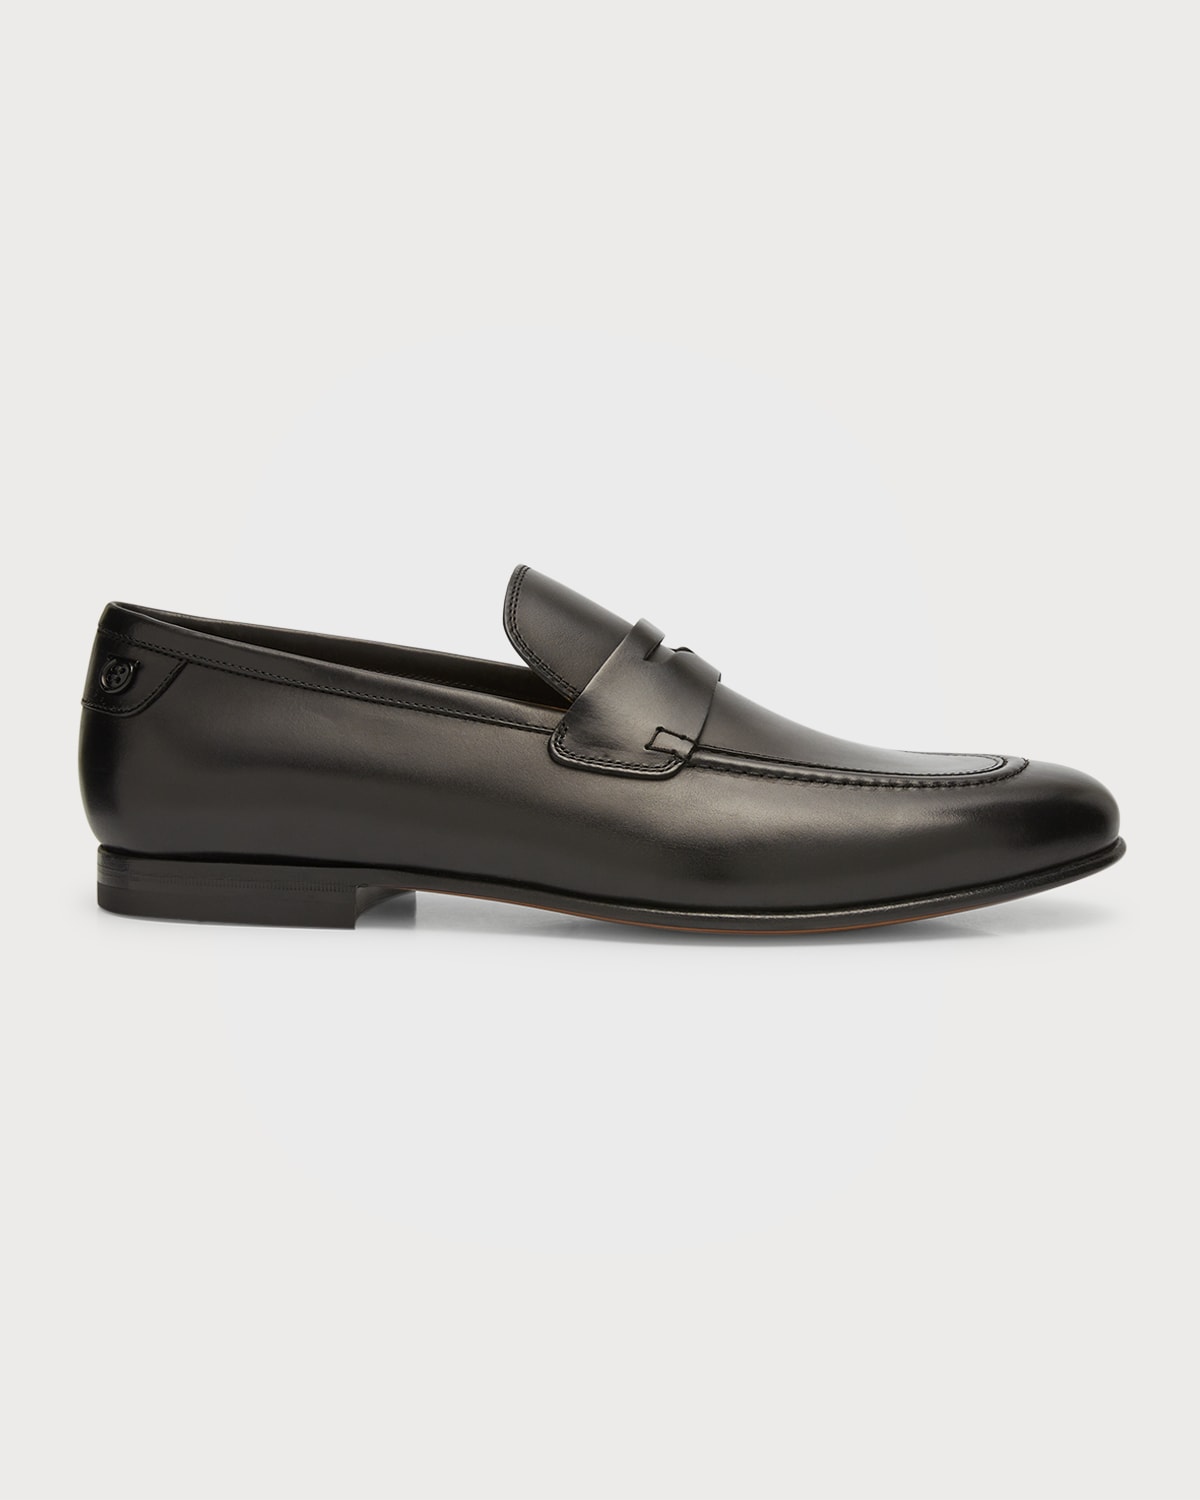 Burberry Men's Shane Check Panel Leather Penny Loafers | Neiman Marcus